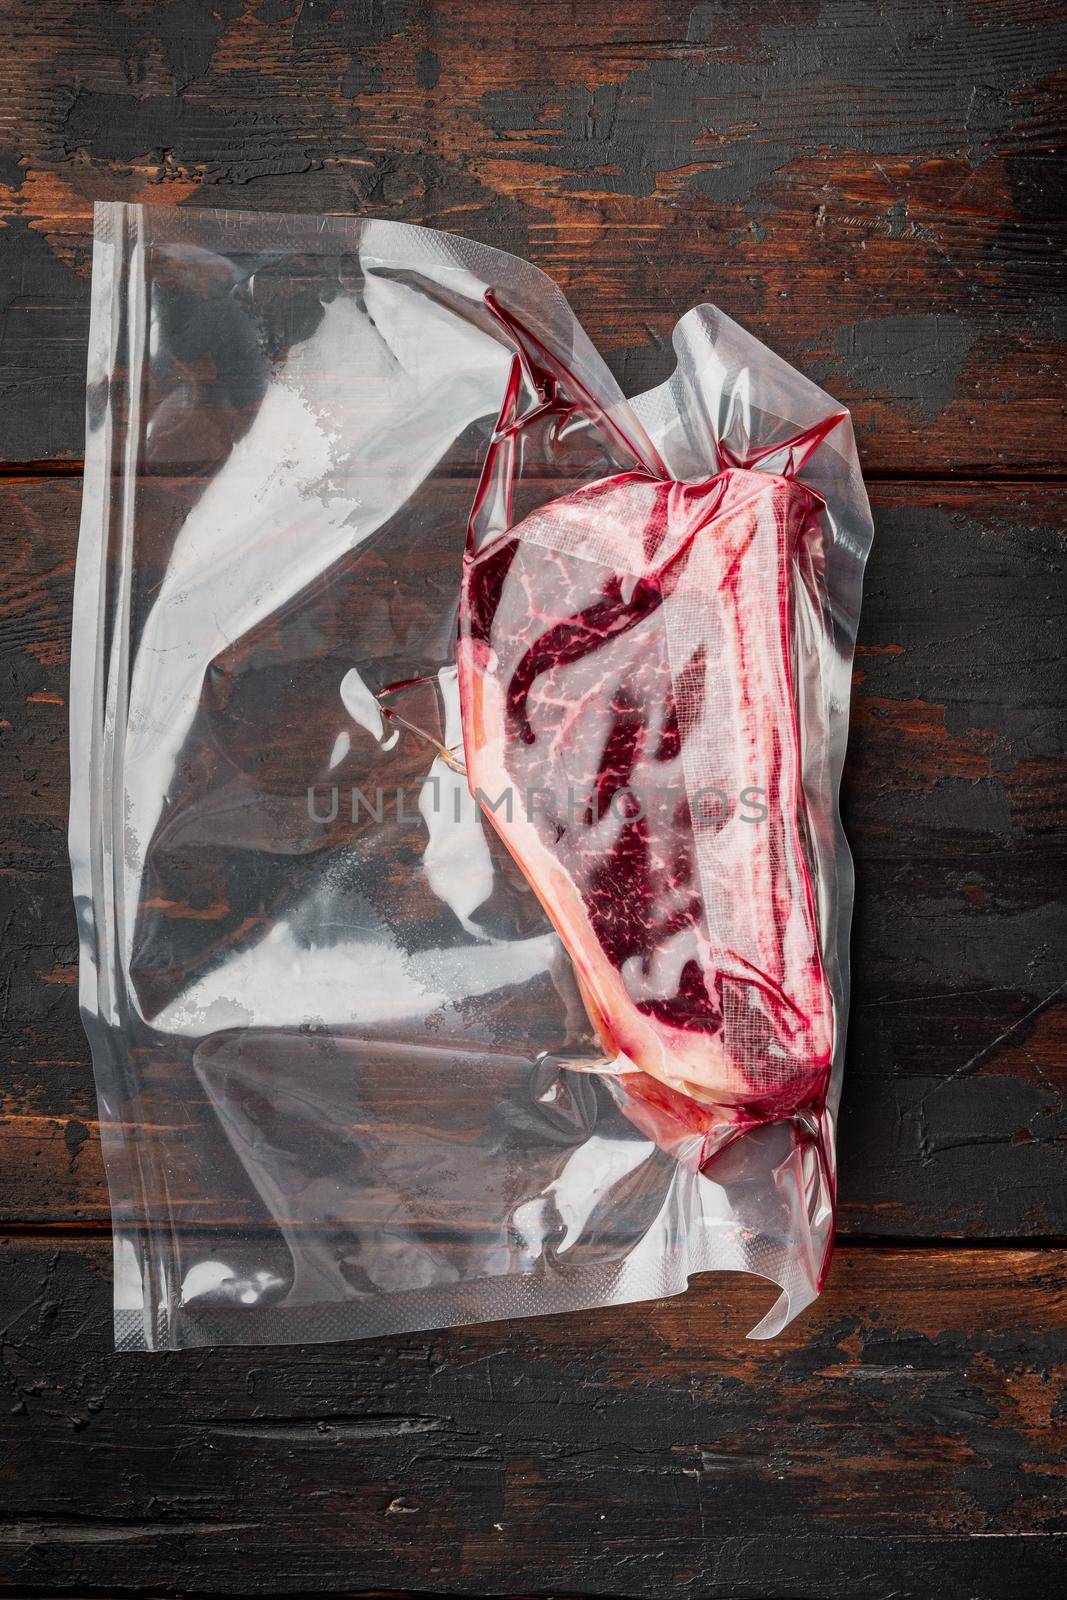 Fresh marbled meat black angus steak in vacuum plastic bag for sous vide, on old dark wooden table background, top view flat lay by Ilianesolenyi